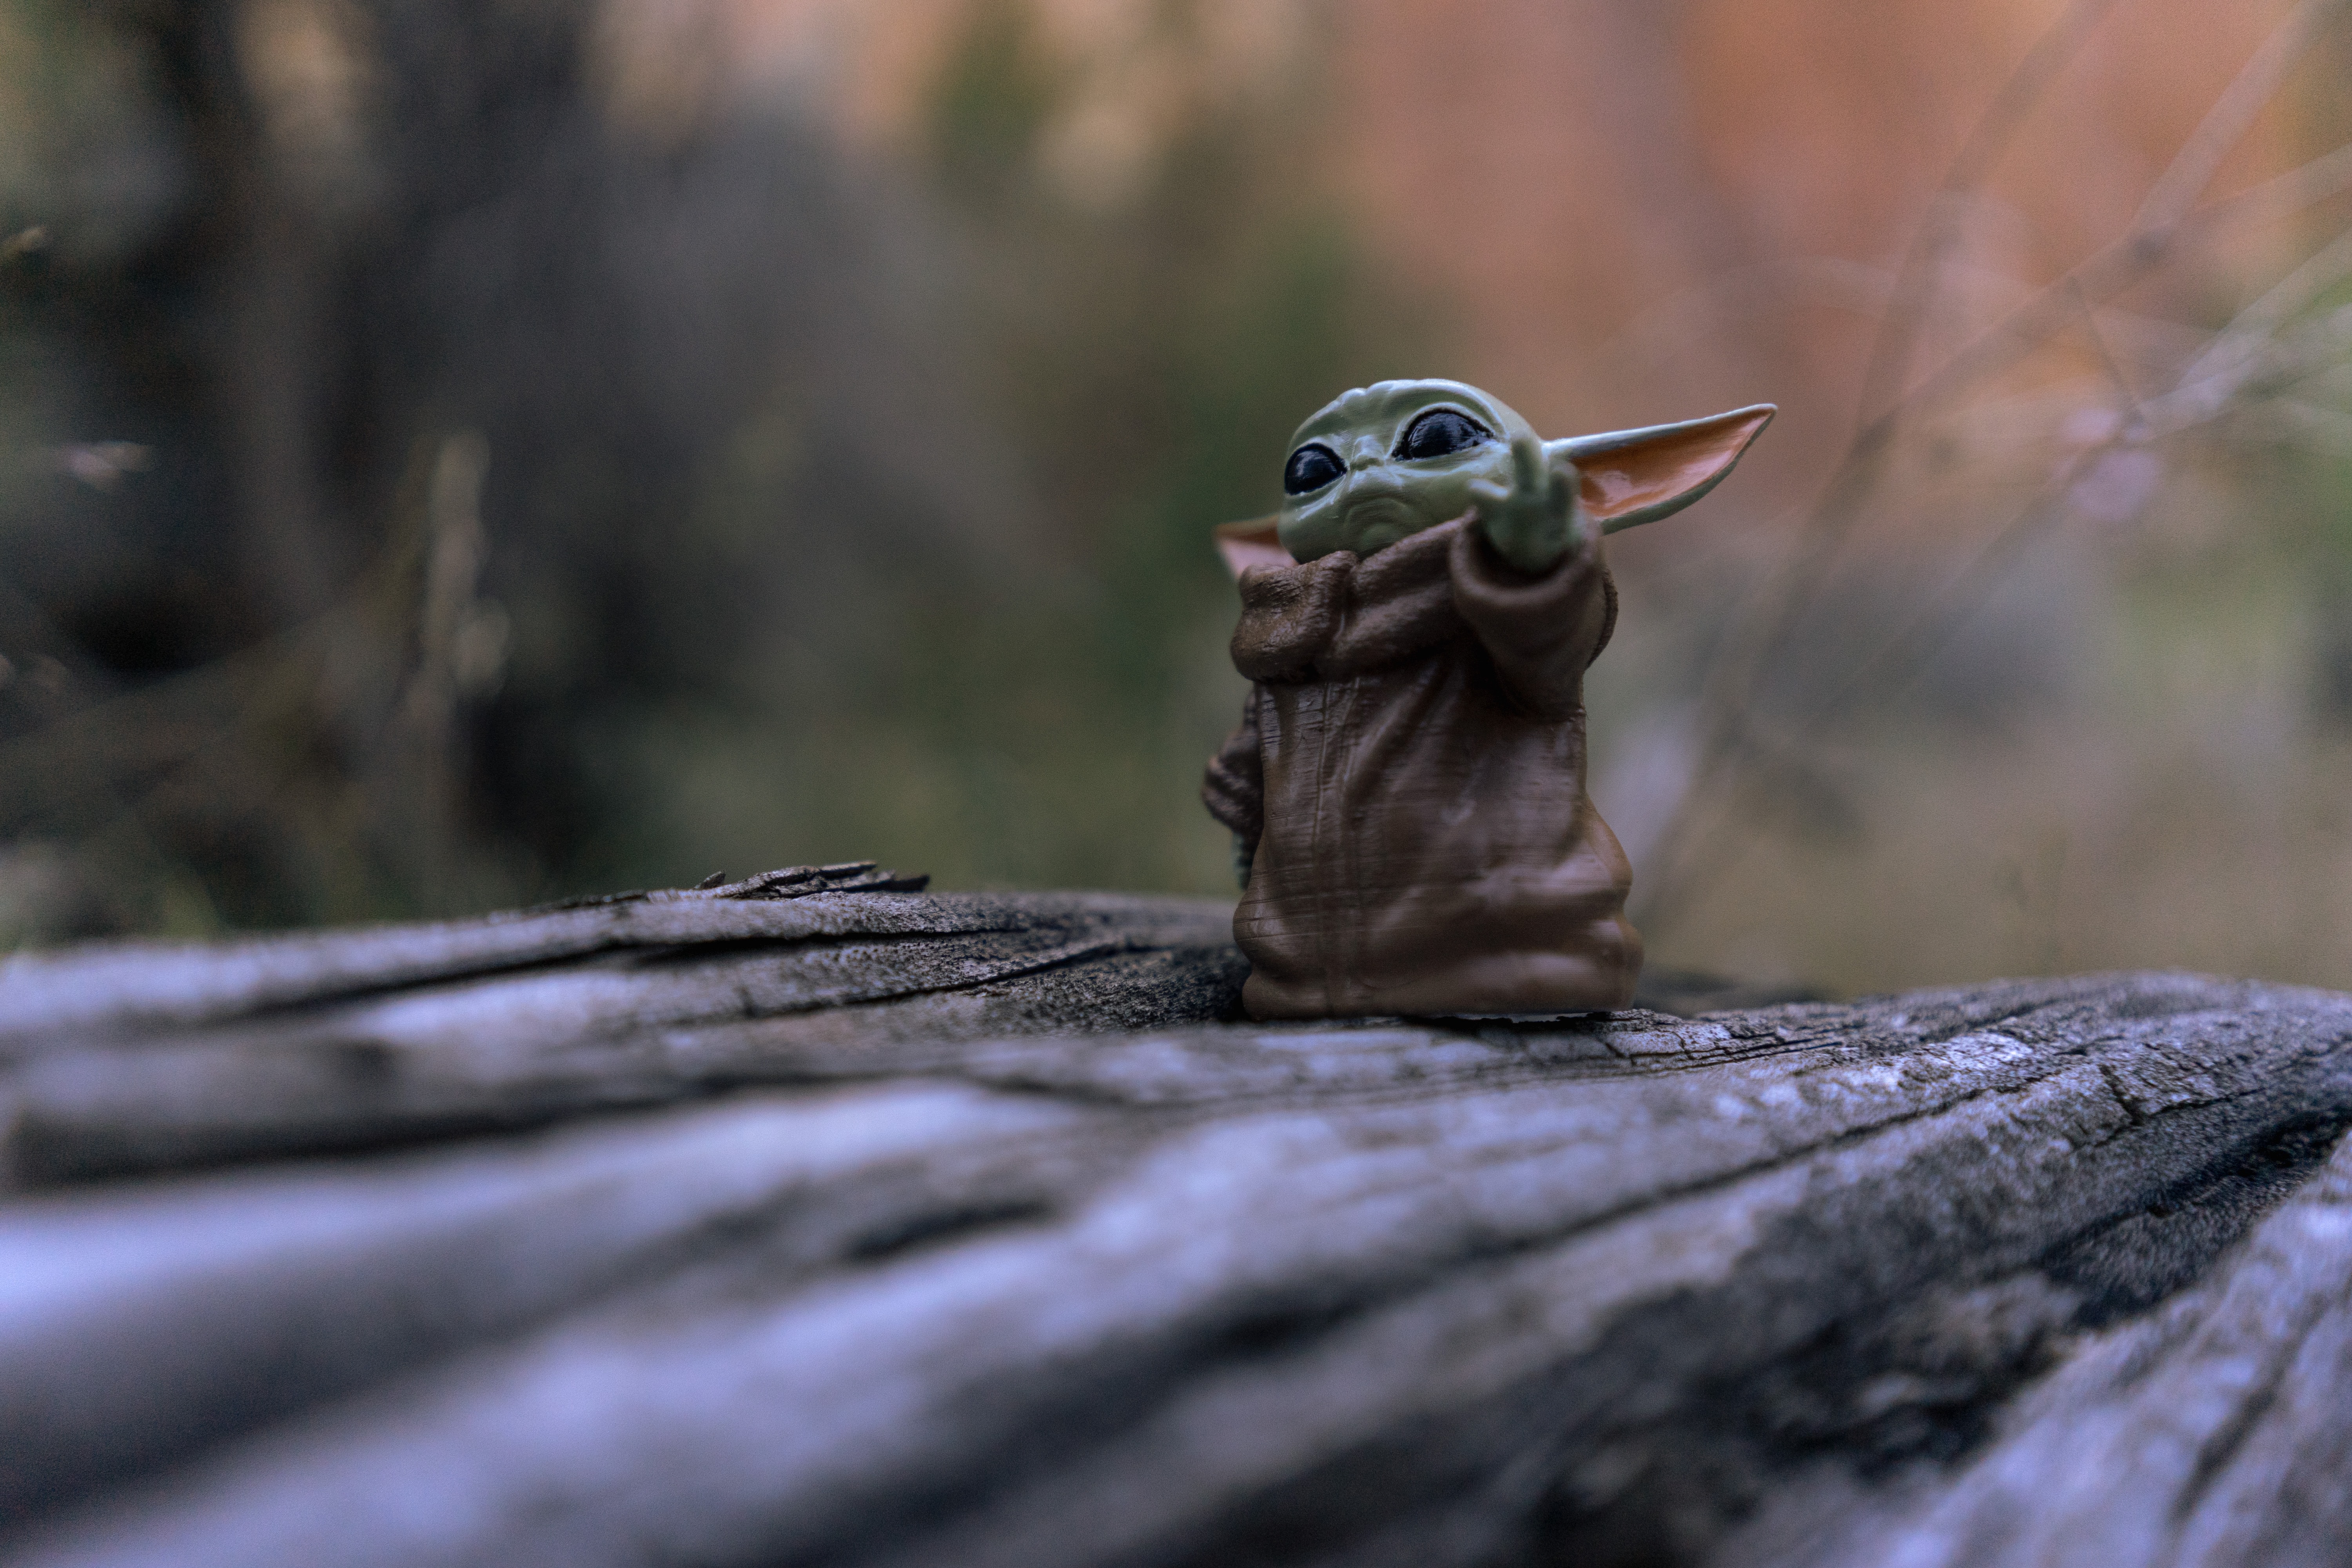 yoda's marketing tips for small business